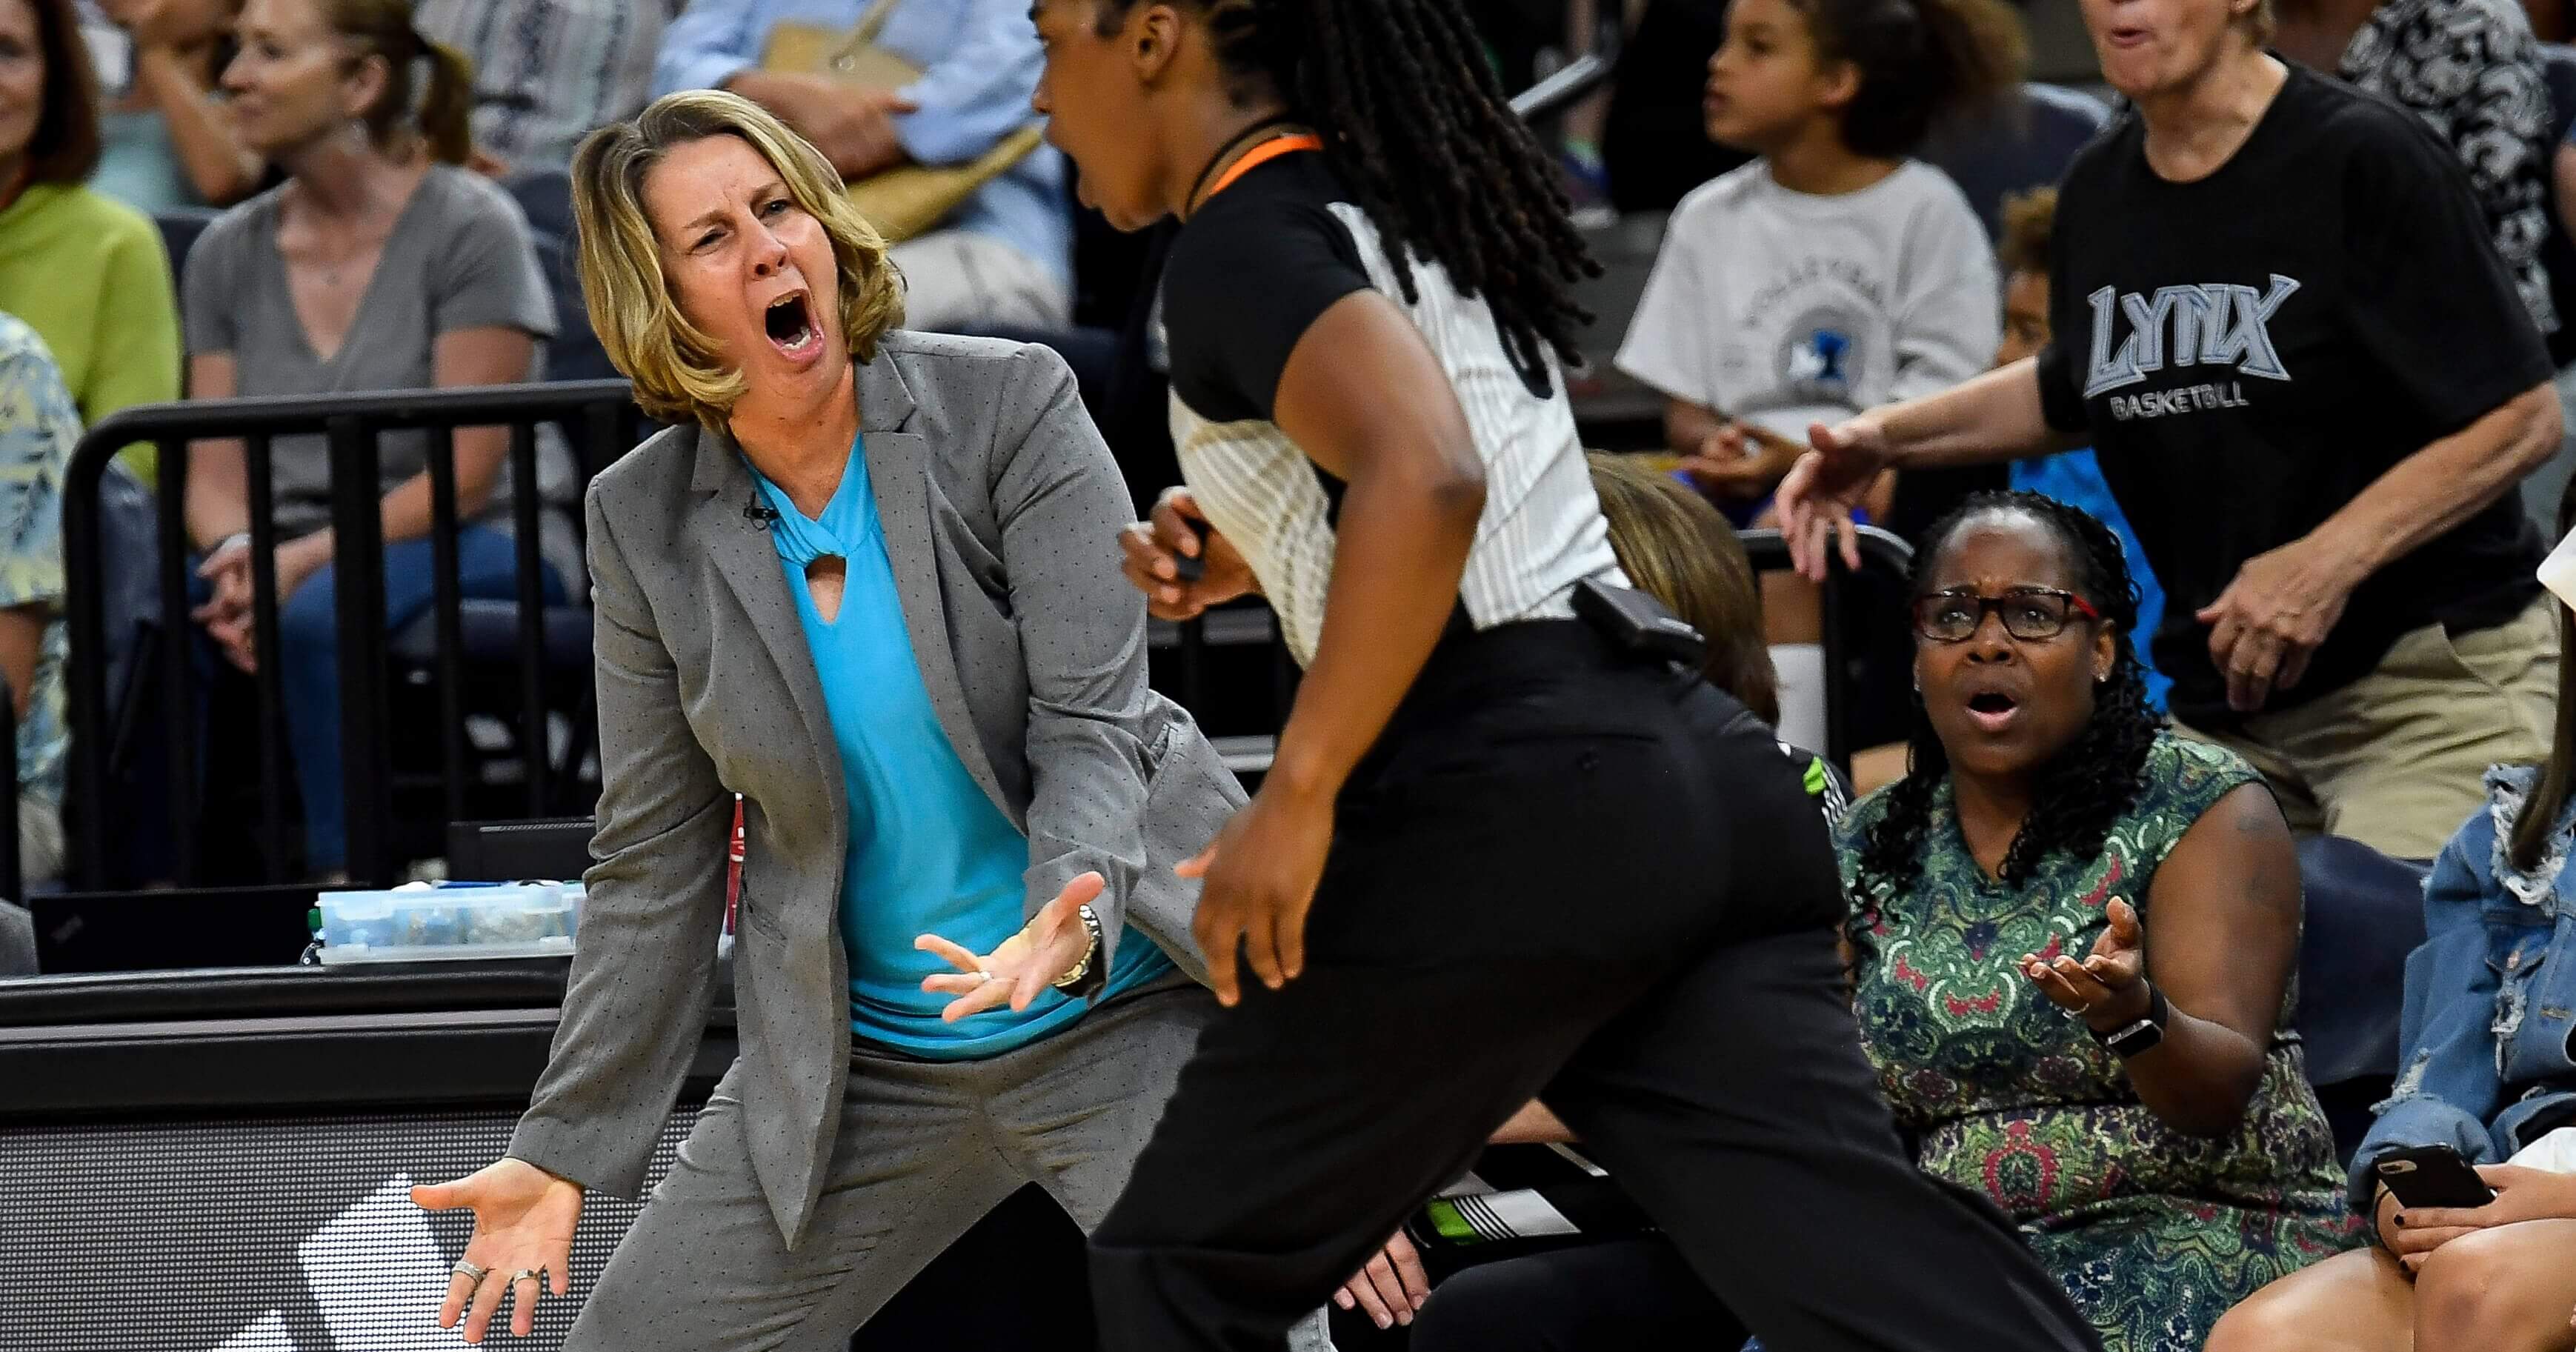 In this July 5, 2018, file photo, Minnesota Lynx coach Cheryl Reeve argues a foul call with an official, leading to a double technical foul and Reeve's ejection during the second half of the team's WNBA basketball game against the Los Angeles Sparks in Minneapolis. Technical fouls are up this year in the WNBA with more already called this season than last.